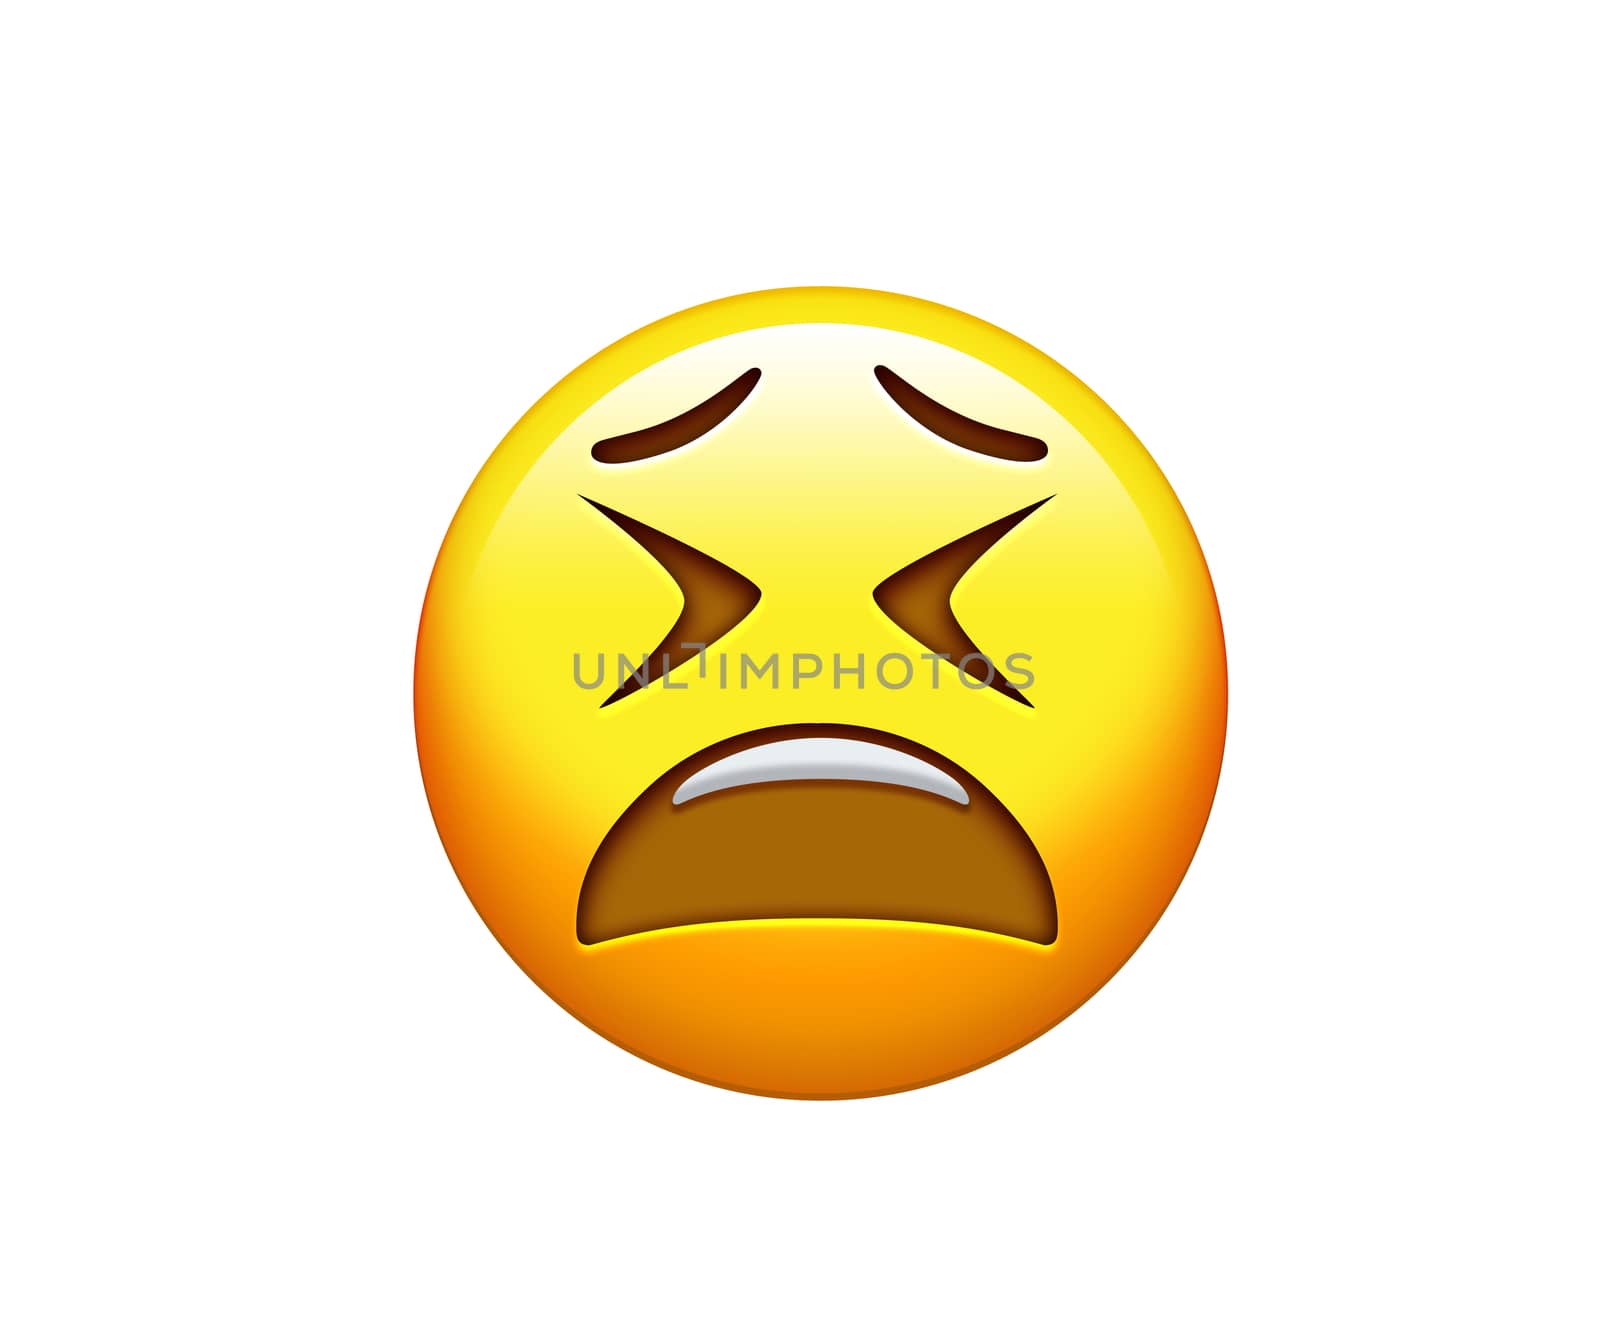 The emoji yellow disappointed and upset face and closing eyes icon